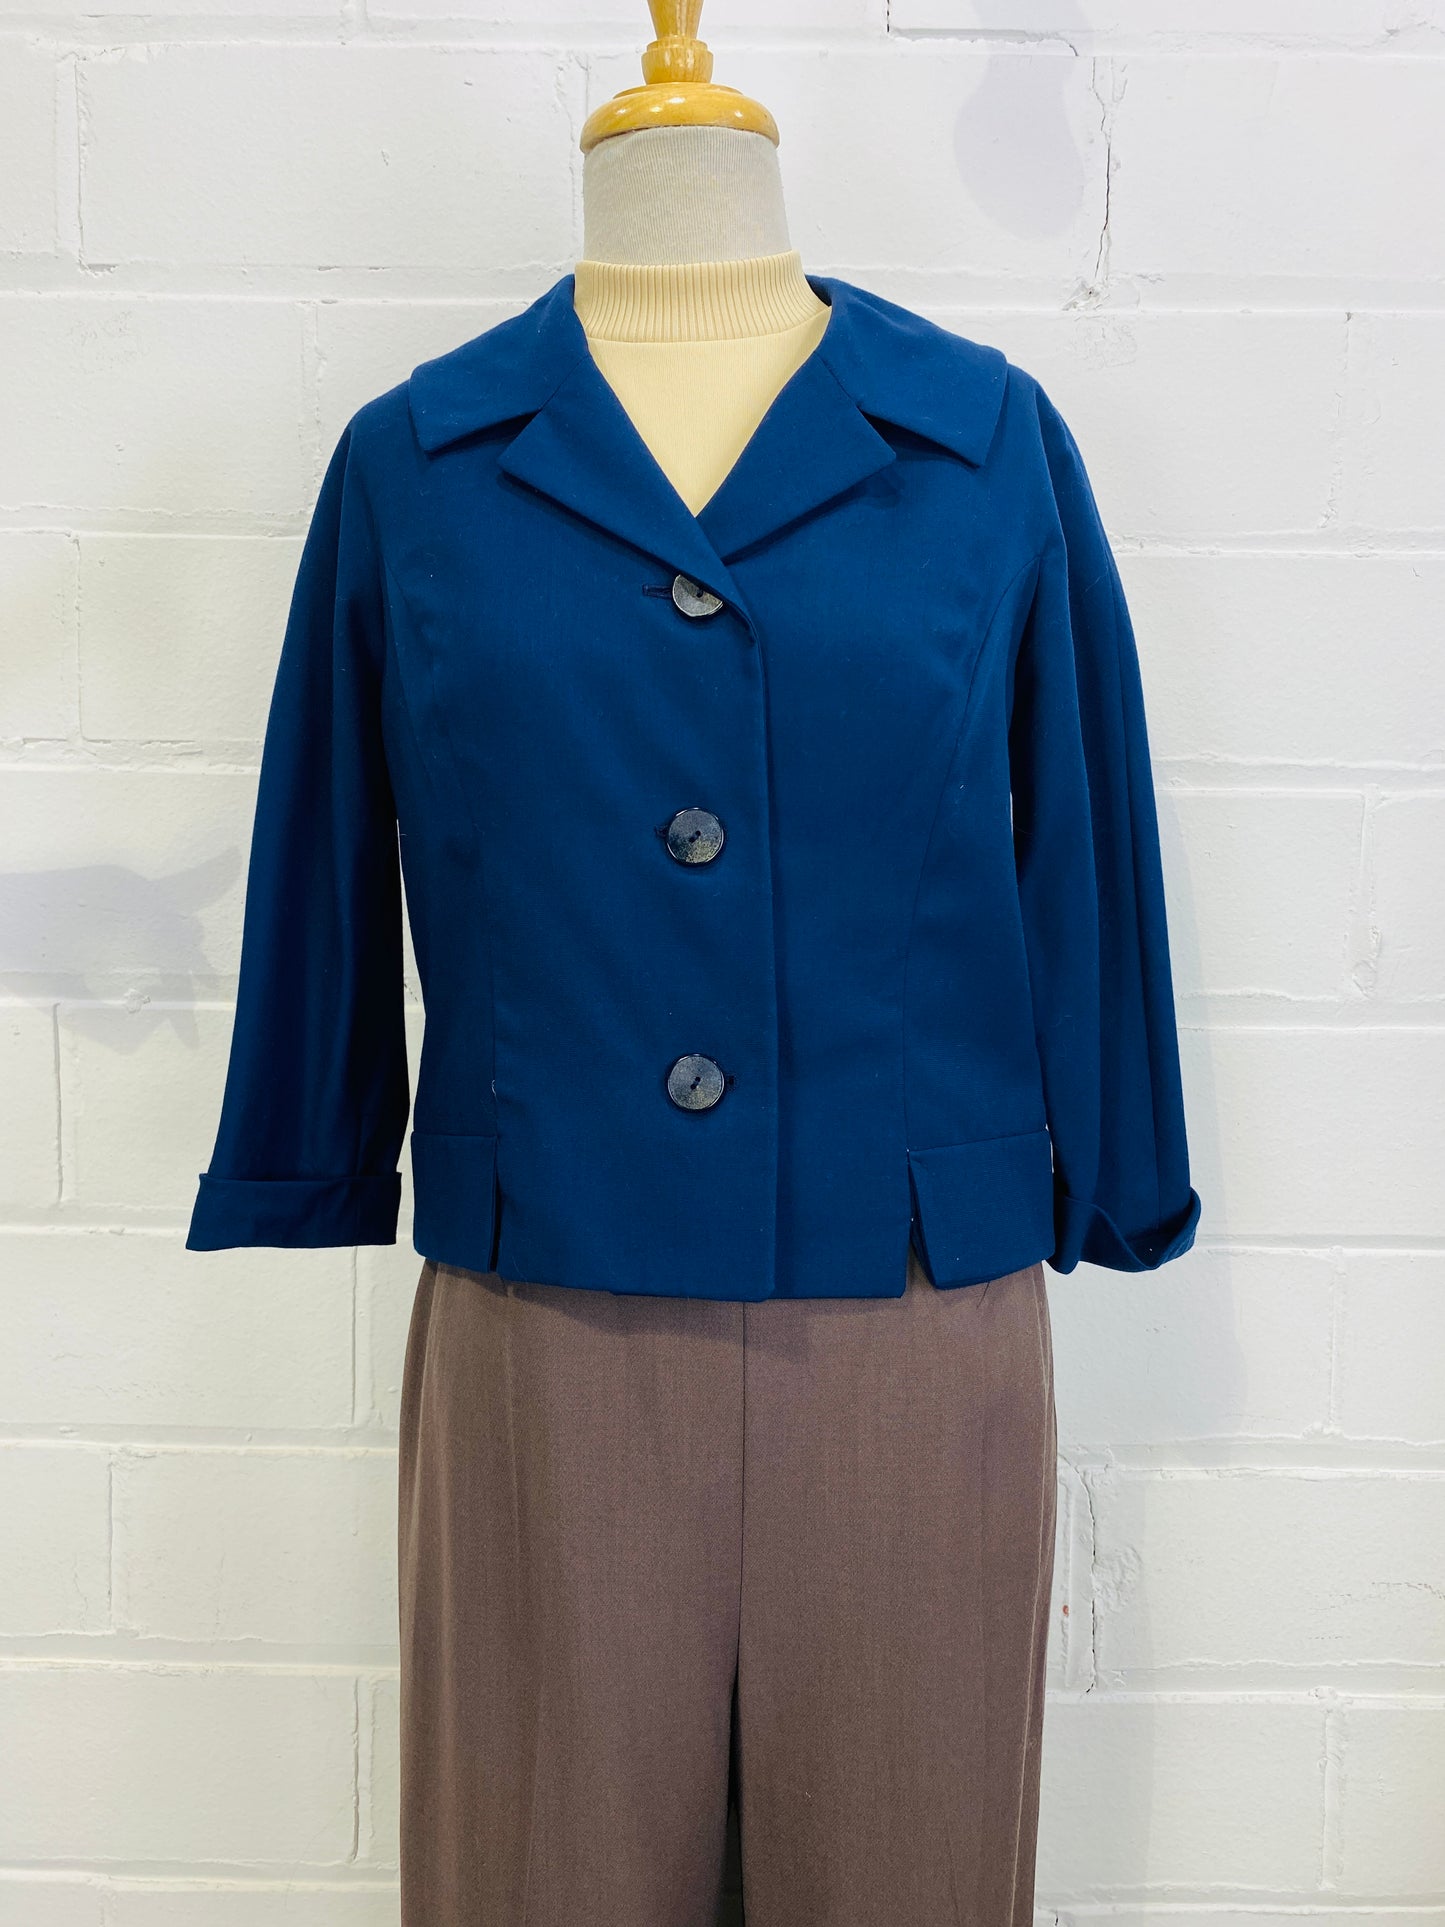 Vintage 1960s 2-Piece Navy Skirt Suit, Small